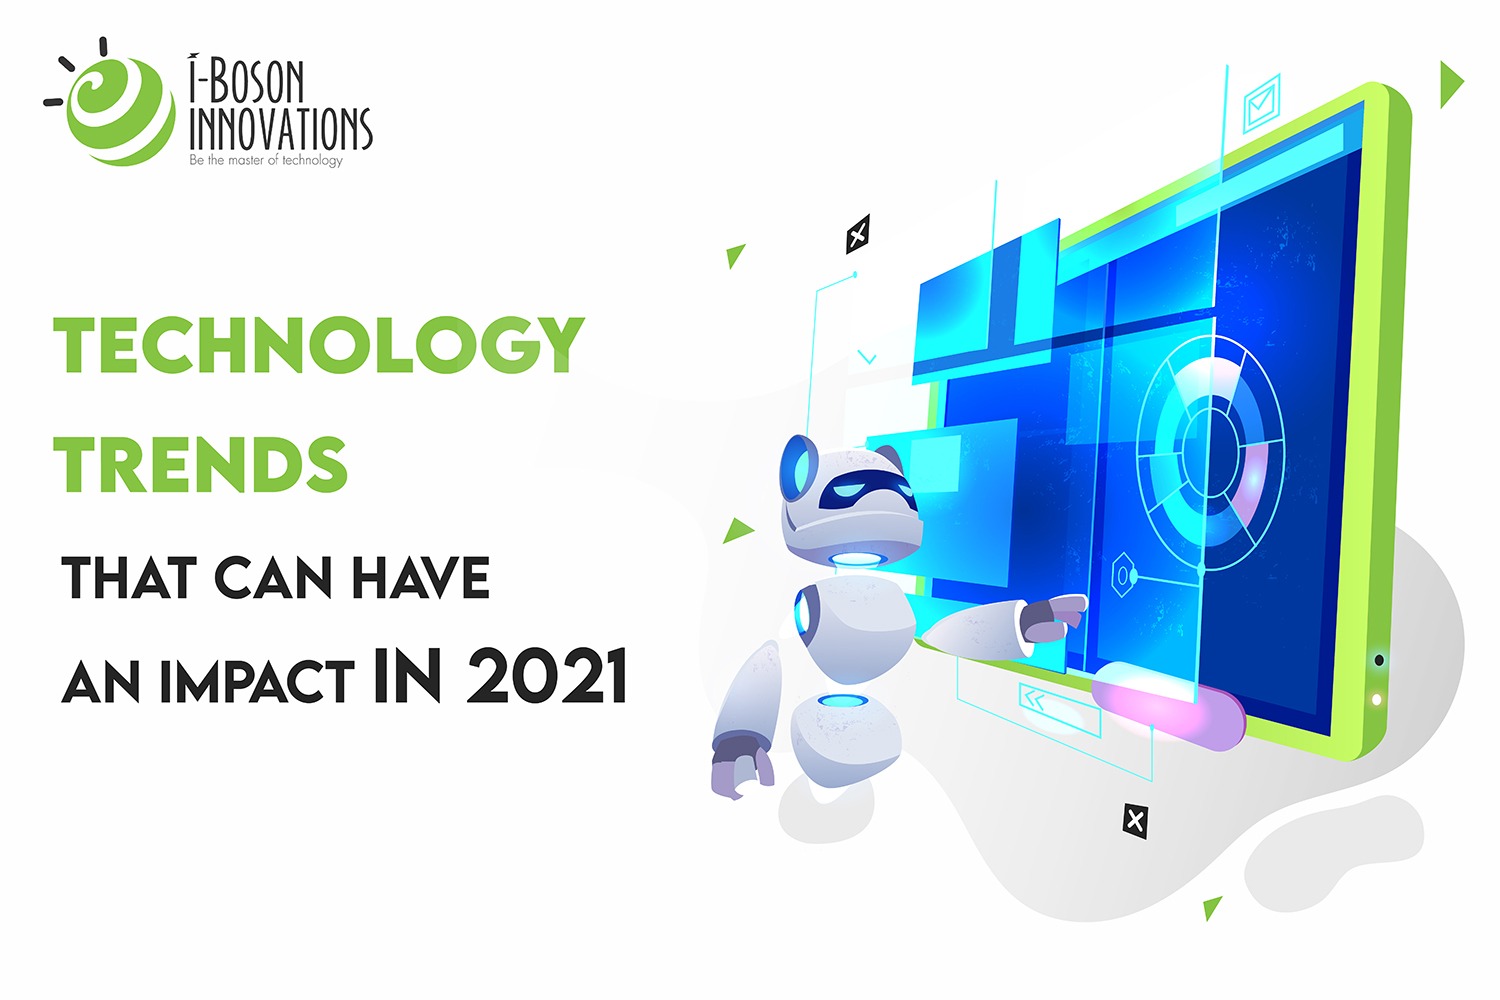 Technology trends that have an impact in 2021 and beyond
                       